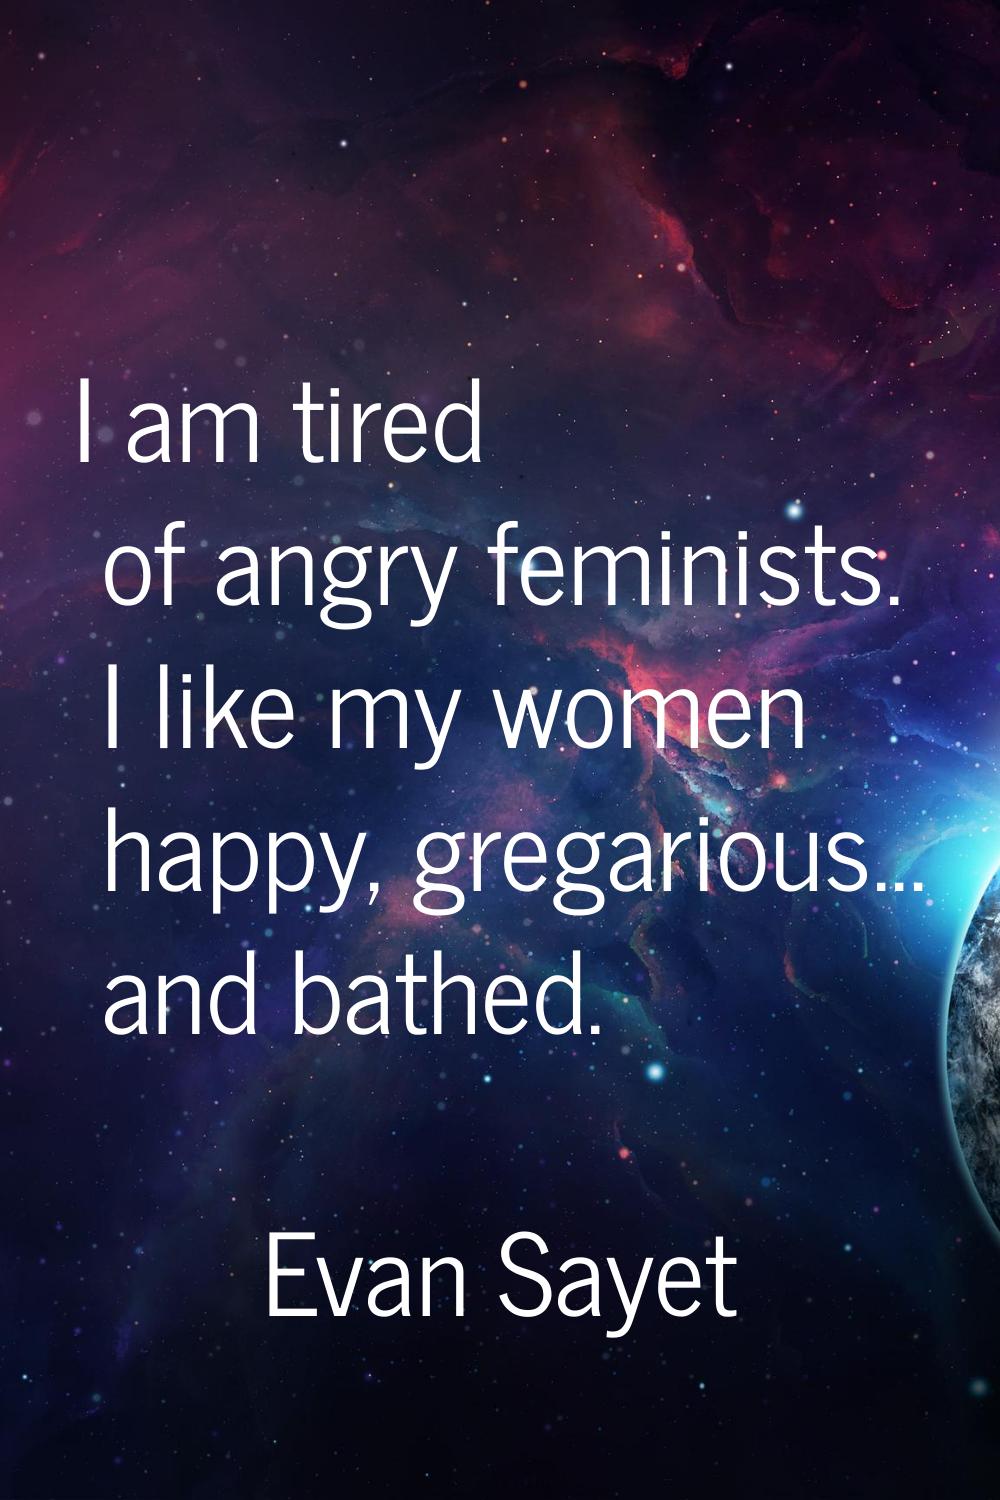 I am tired of angry feminists. I like my women happy, gregarious... and bathed.